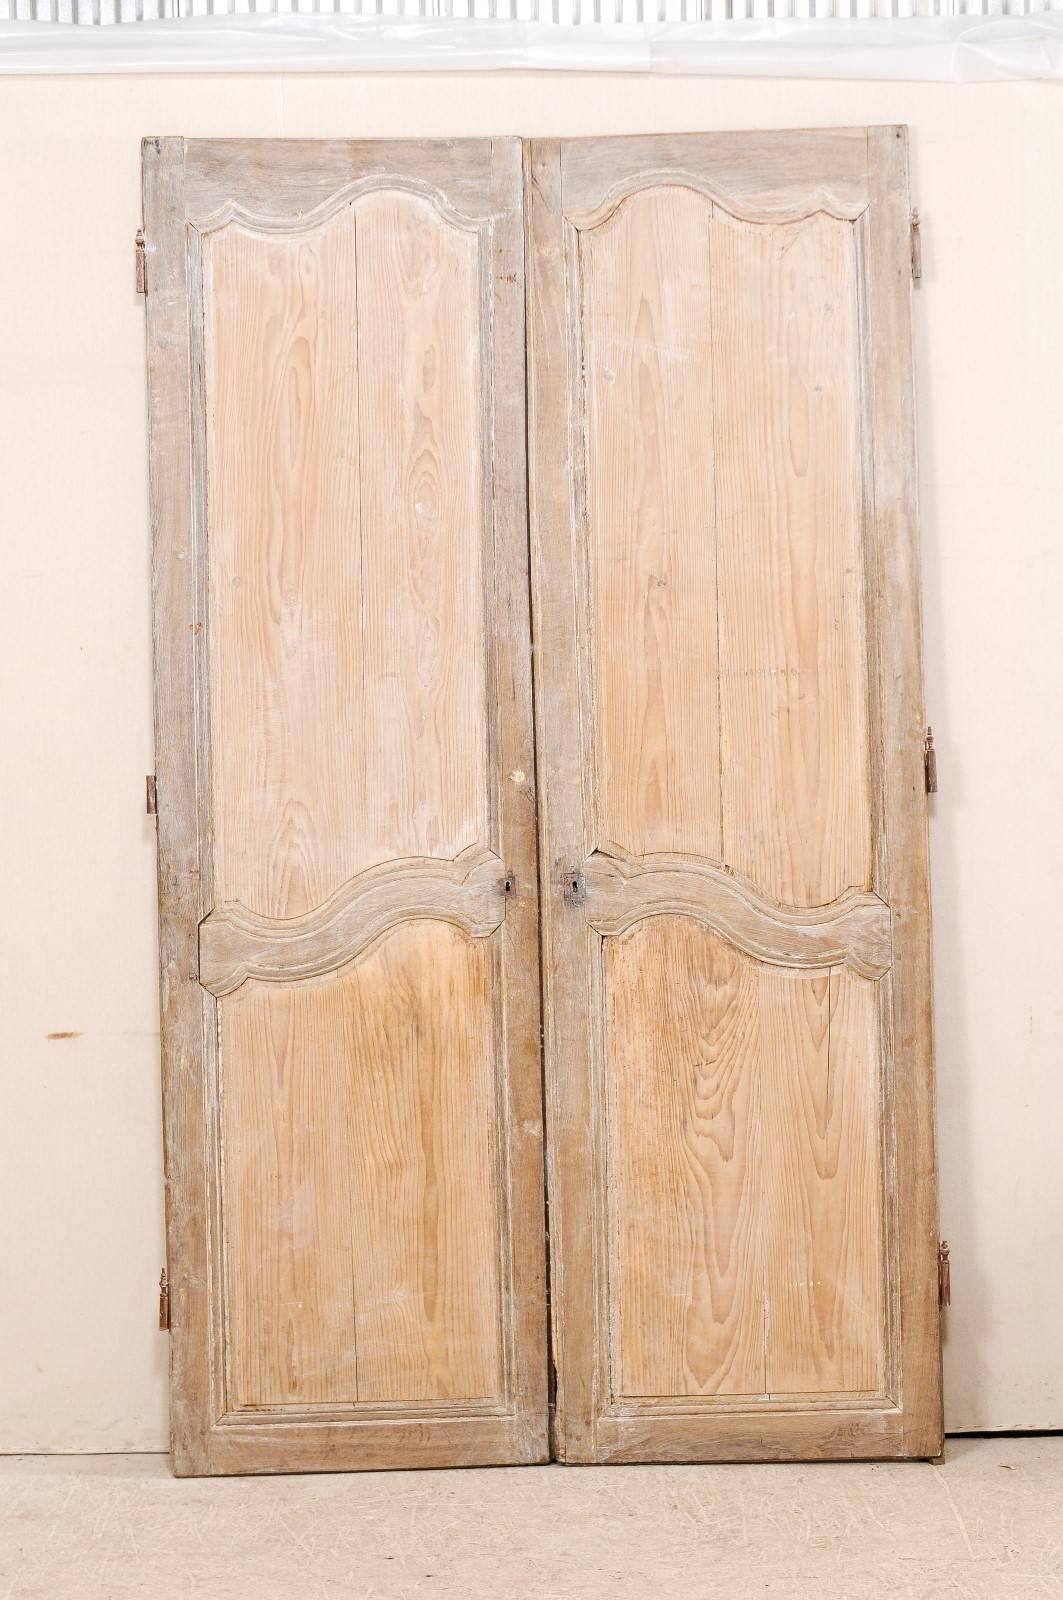 A pair of tall French wooden doors from the 19th century. This pair of French doors each feature two recessed panels, which have a sweetly carved curvy edging along the top and middle sections of the panel. The doors have a darker tone wood